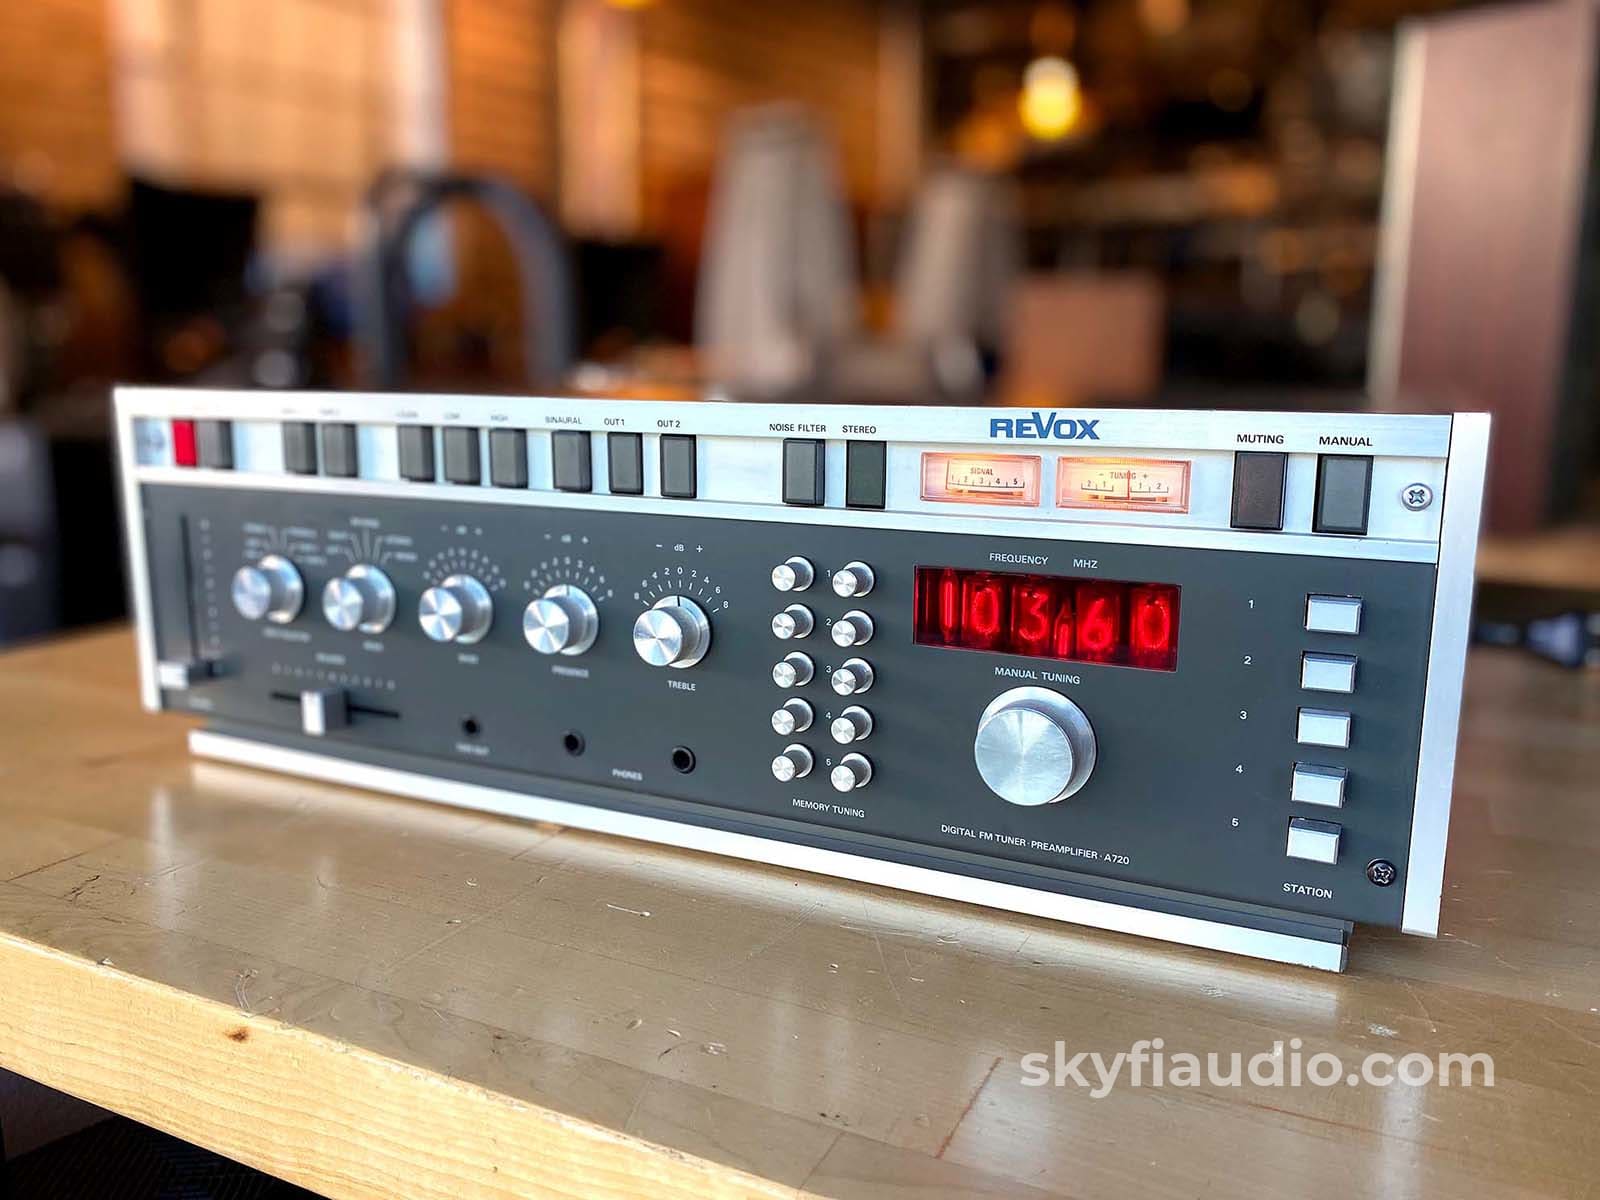 revox-a720-preamplifier-tuner-with-gorgeous-nixie-tube-display-576.jpg